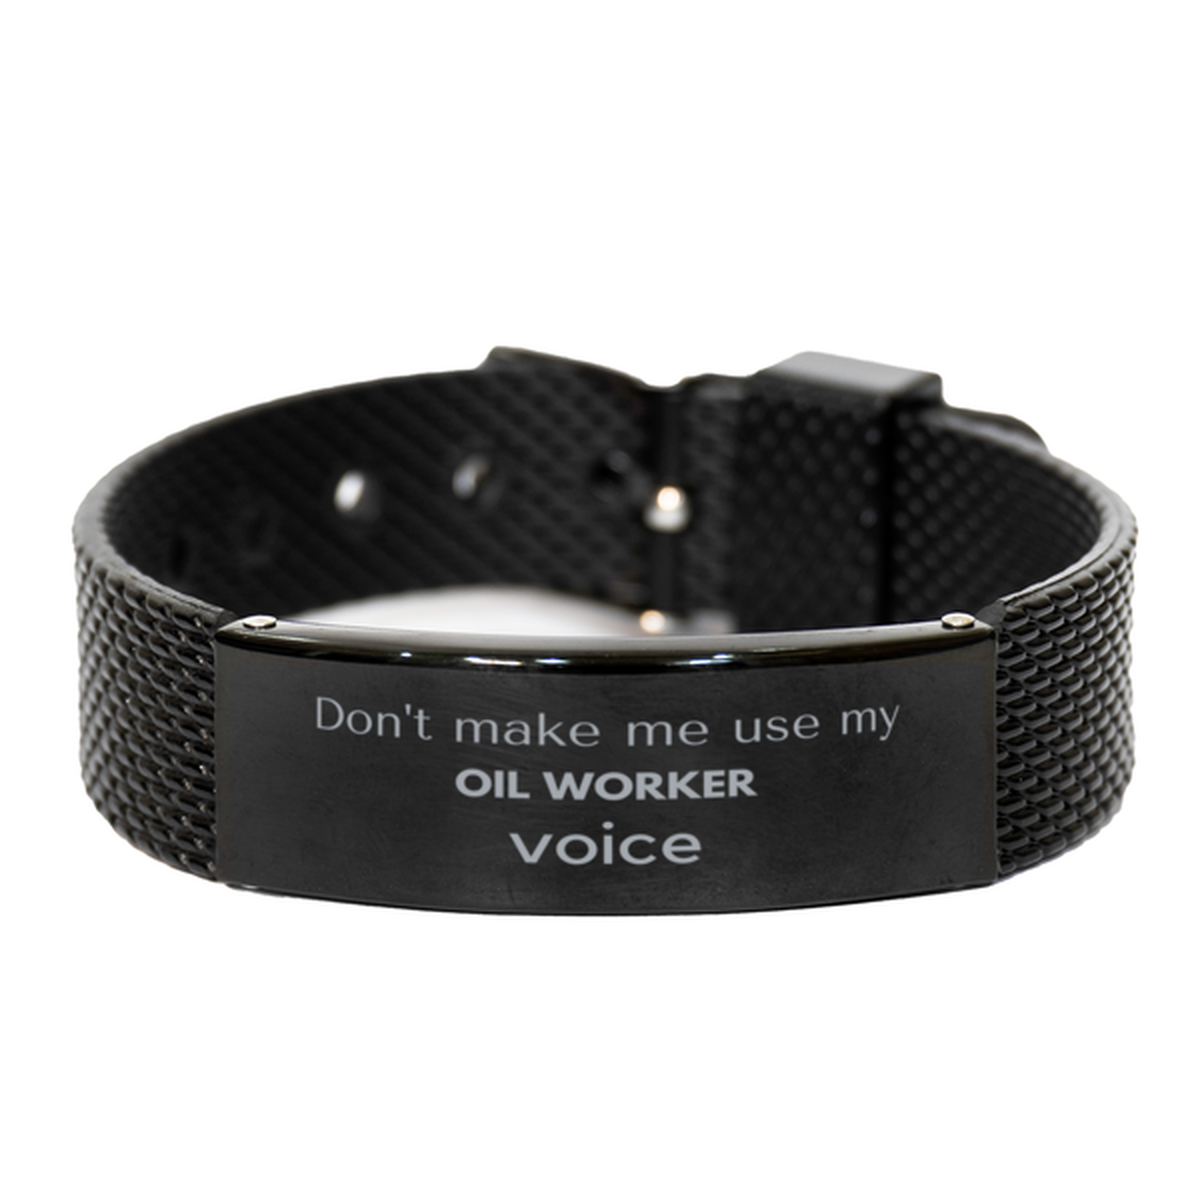 Don't make me use my Oil Worker voice, Sarcasm Oil Worker Gifts, Christmas Oil Worker Black Shark Mesh Bracelet Birthday Unique Gifts For Oil Worker Coworkers, Men, Women, Colleague, Friends